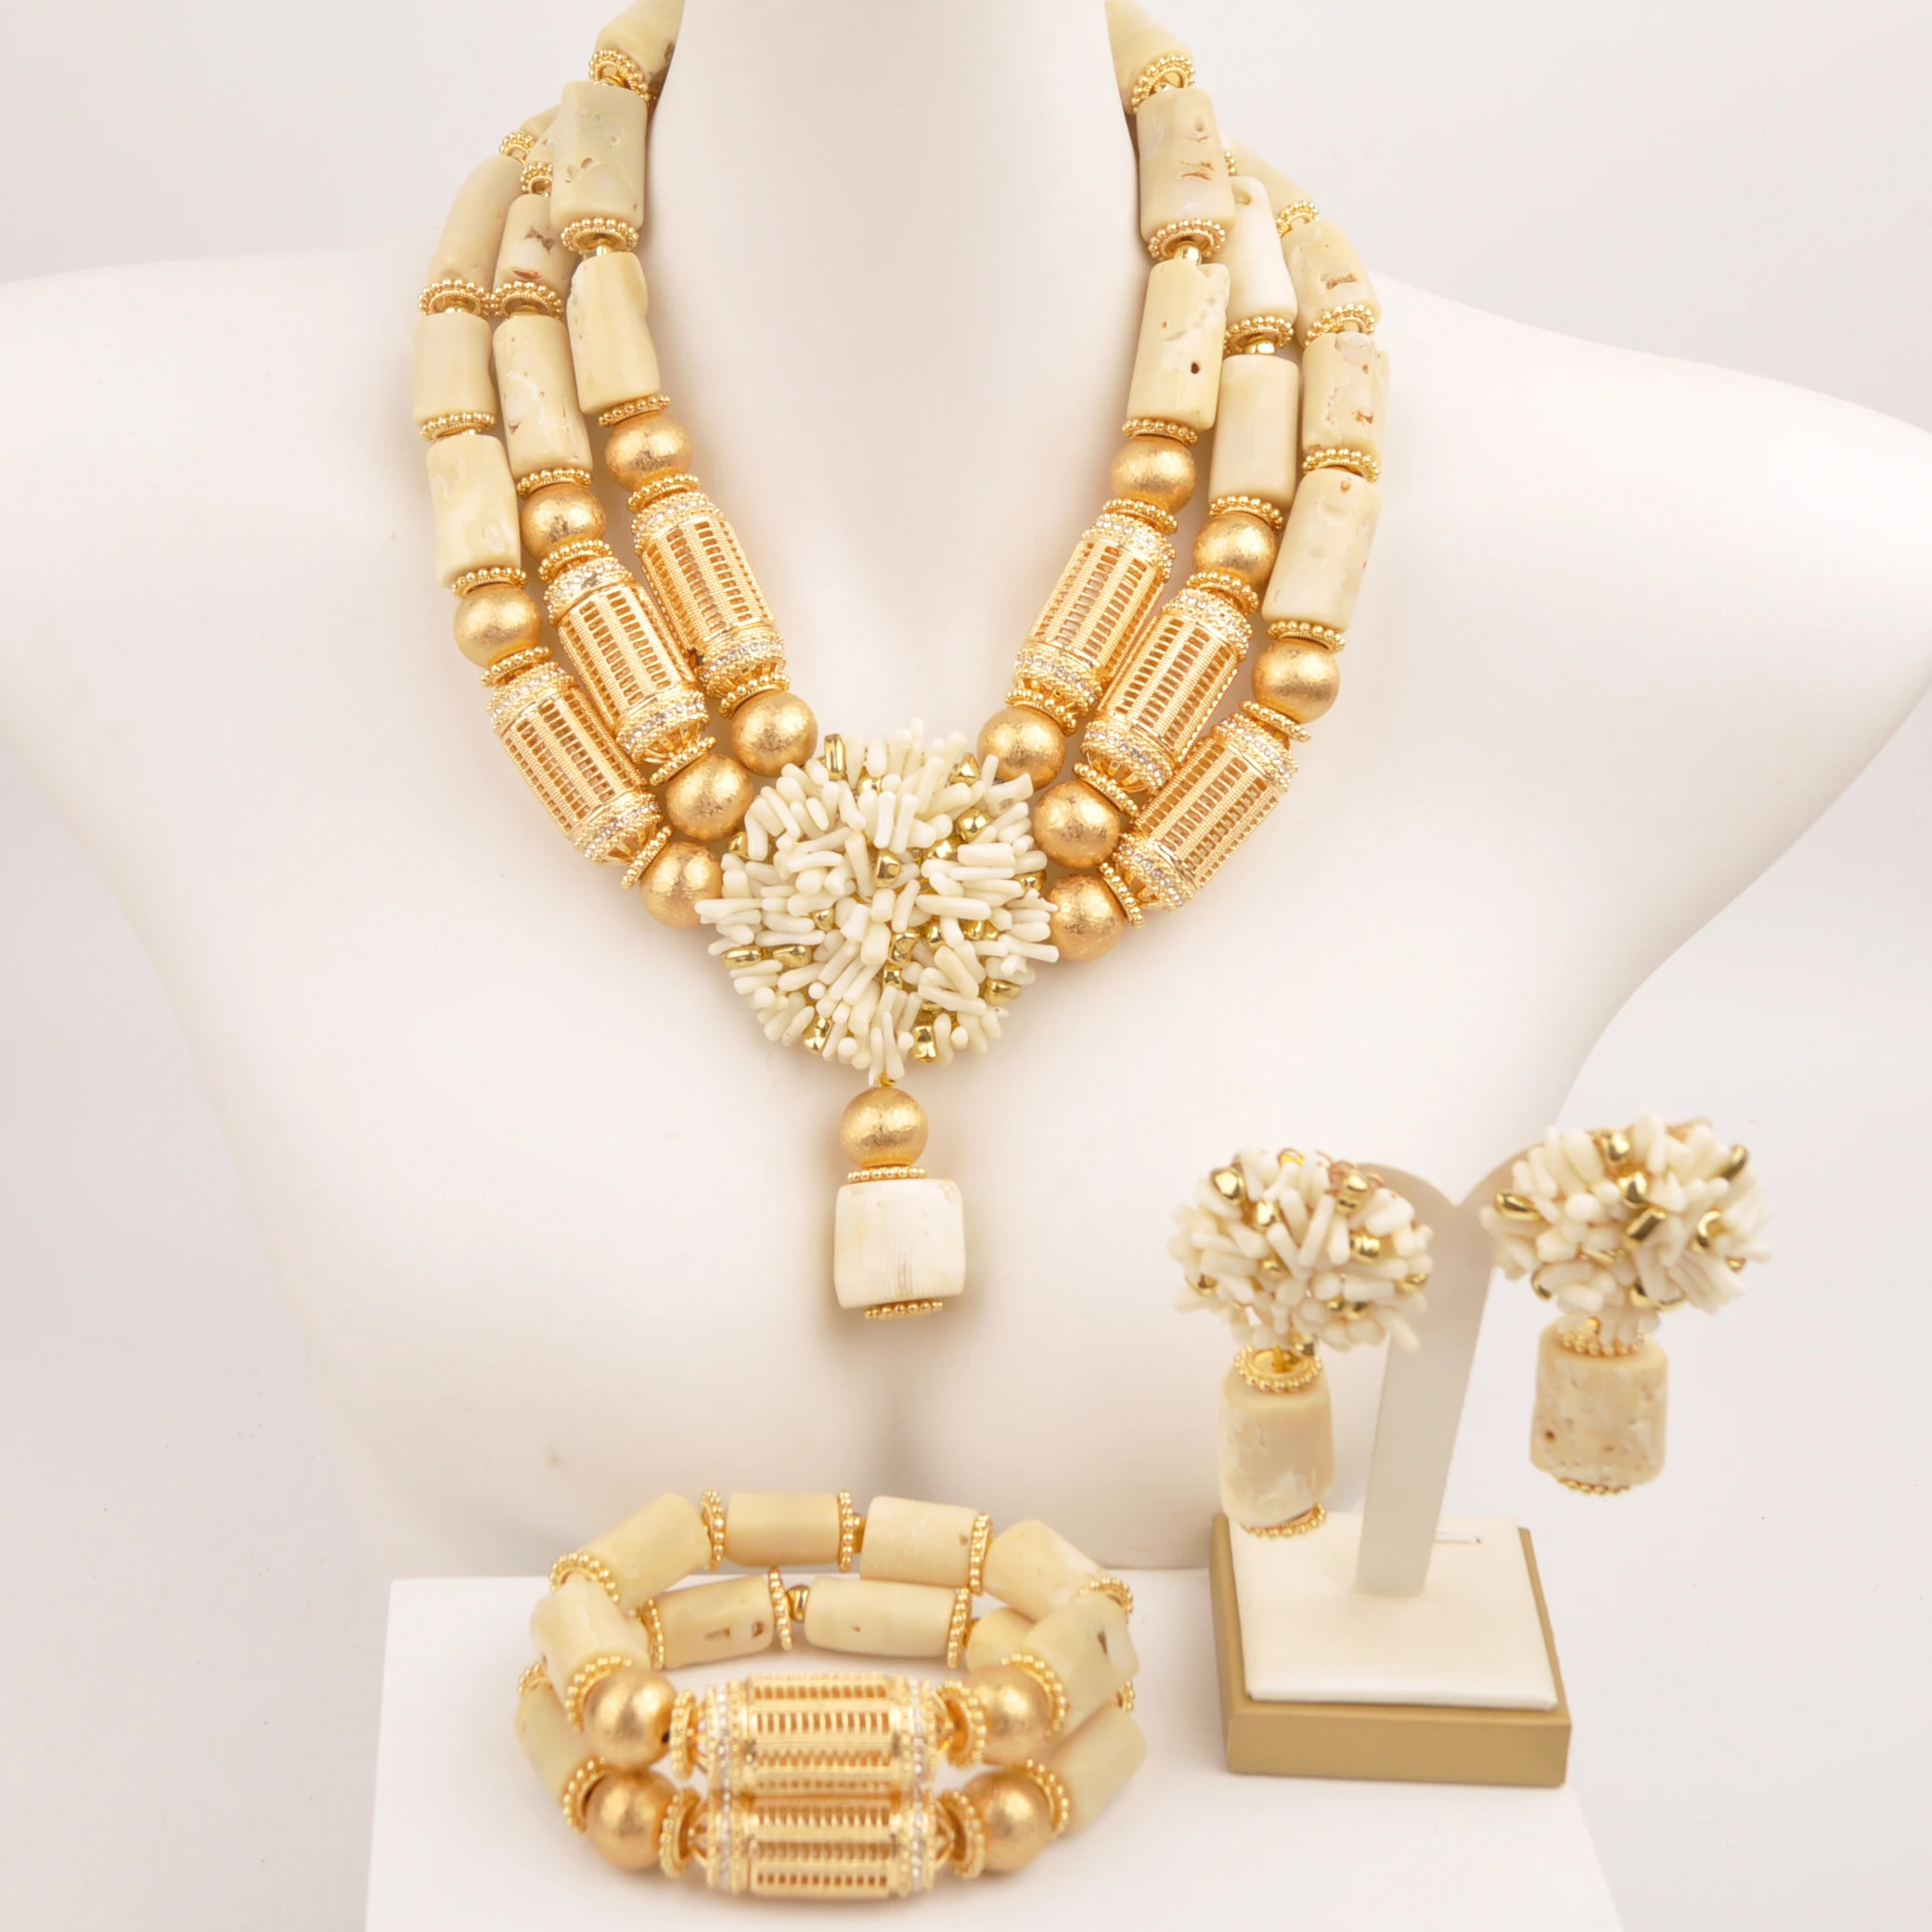 

White Natural Coral Necklace Nigerian Wedding Bridal Jewelry Sets